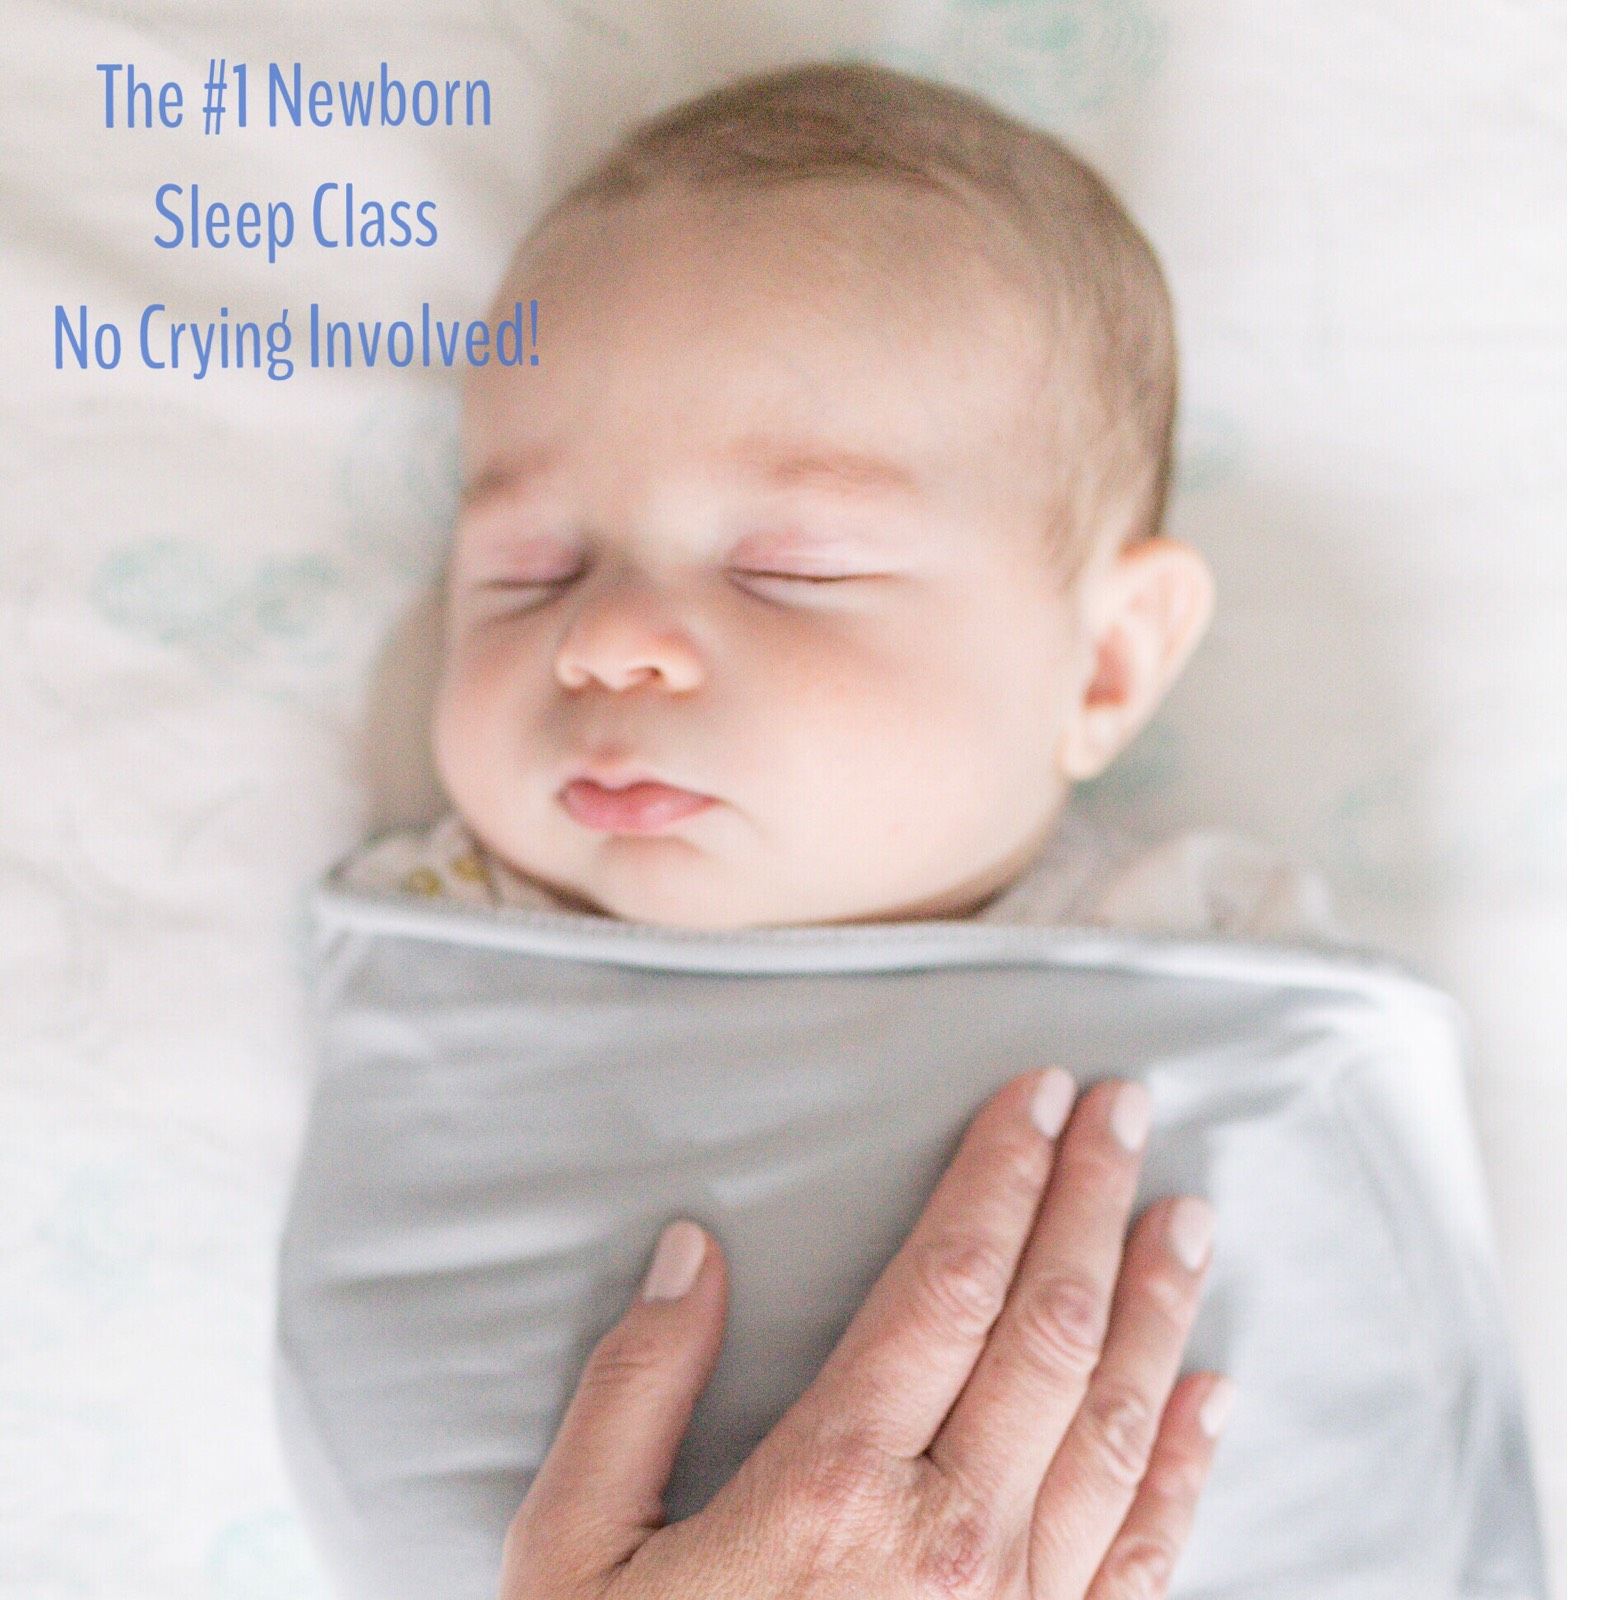 This newborn sleep class is life changing! No crying involved ...